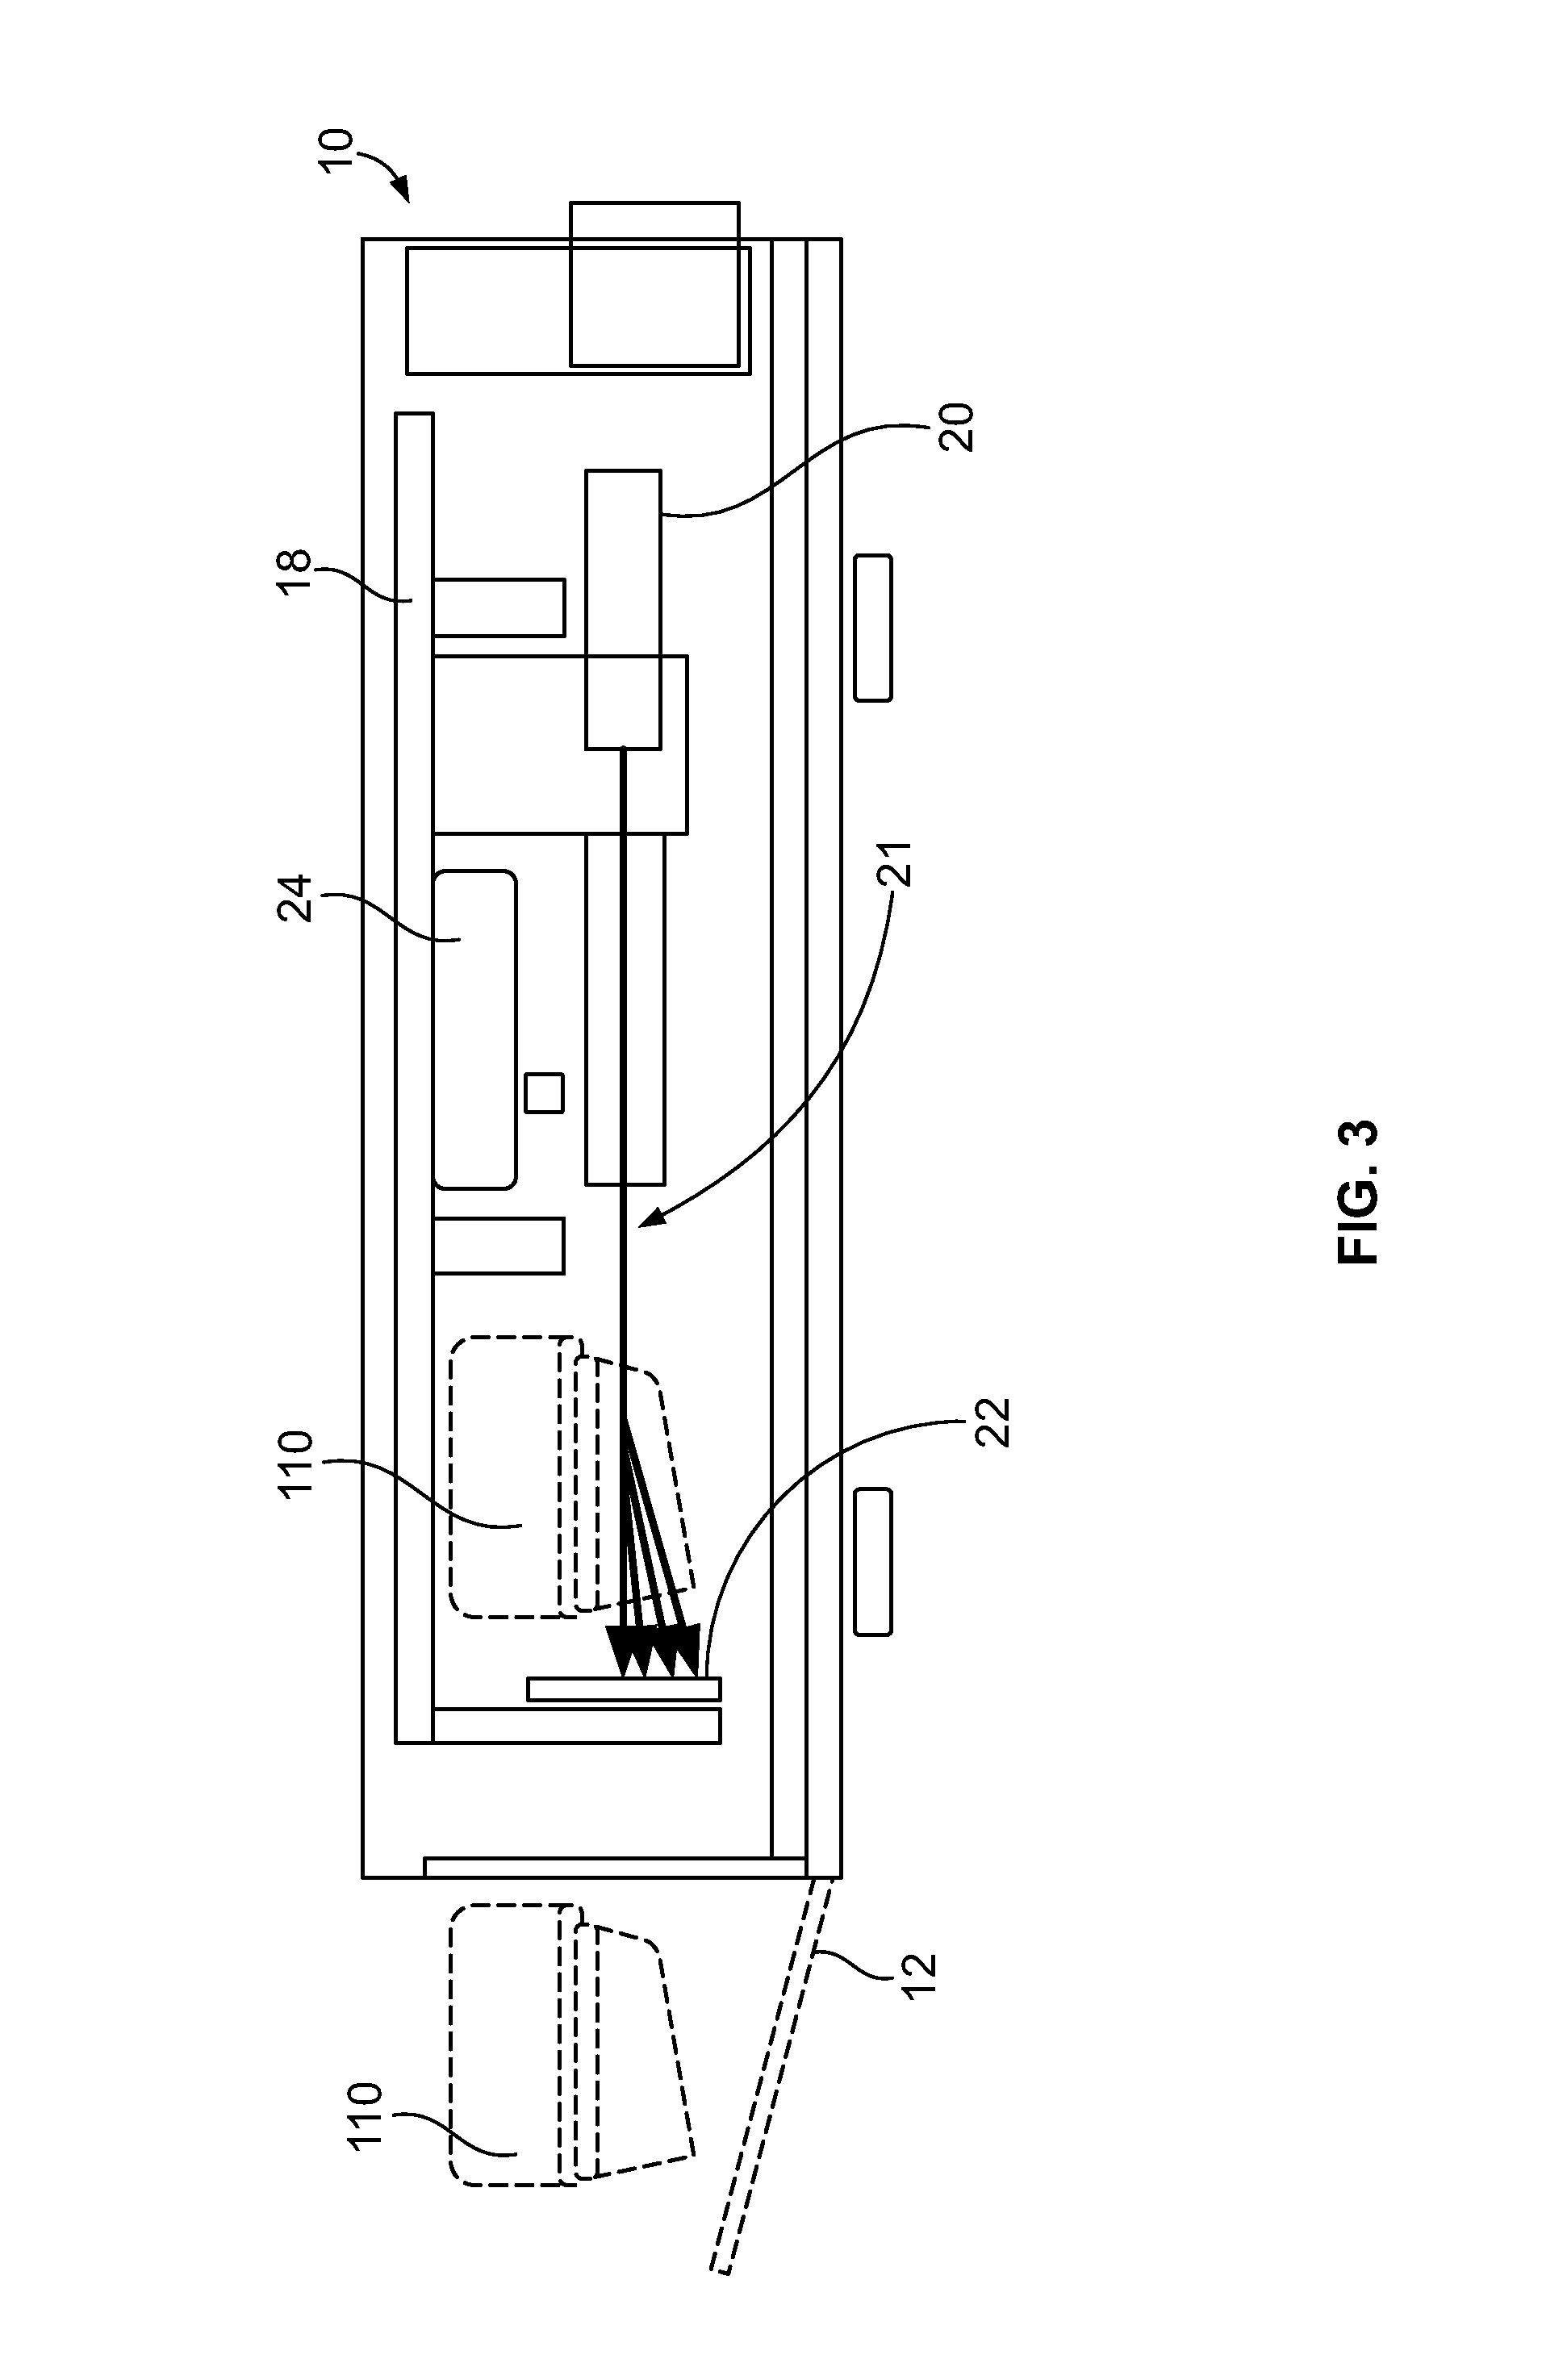 Multi-Sample Laser-Scatter Measurement Instrument With Incubation Feature And Systems For Using The Same